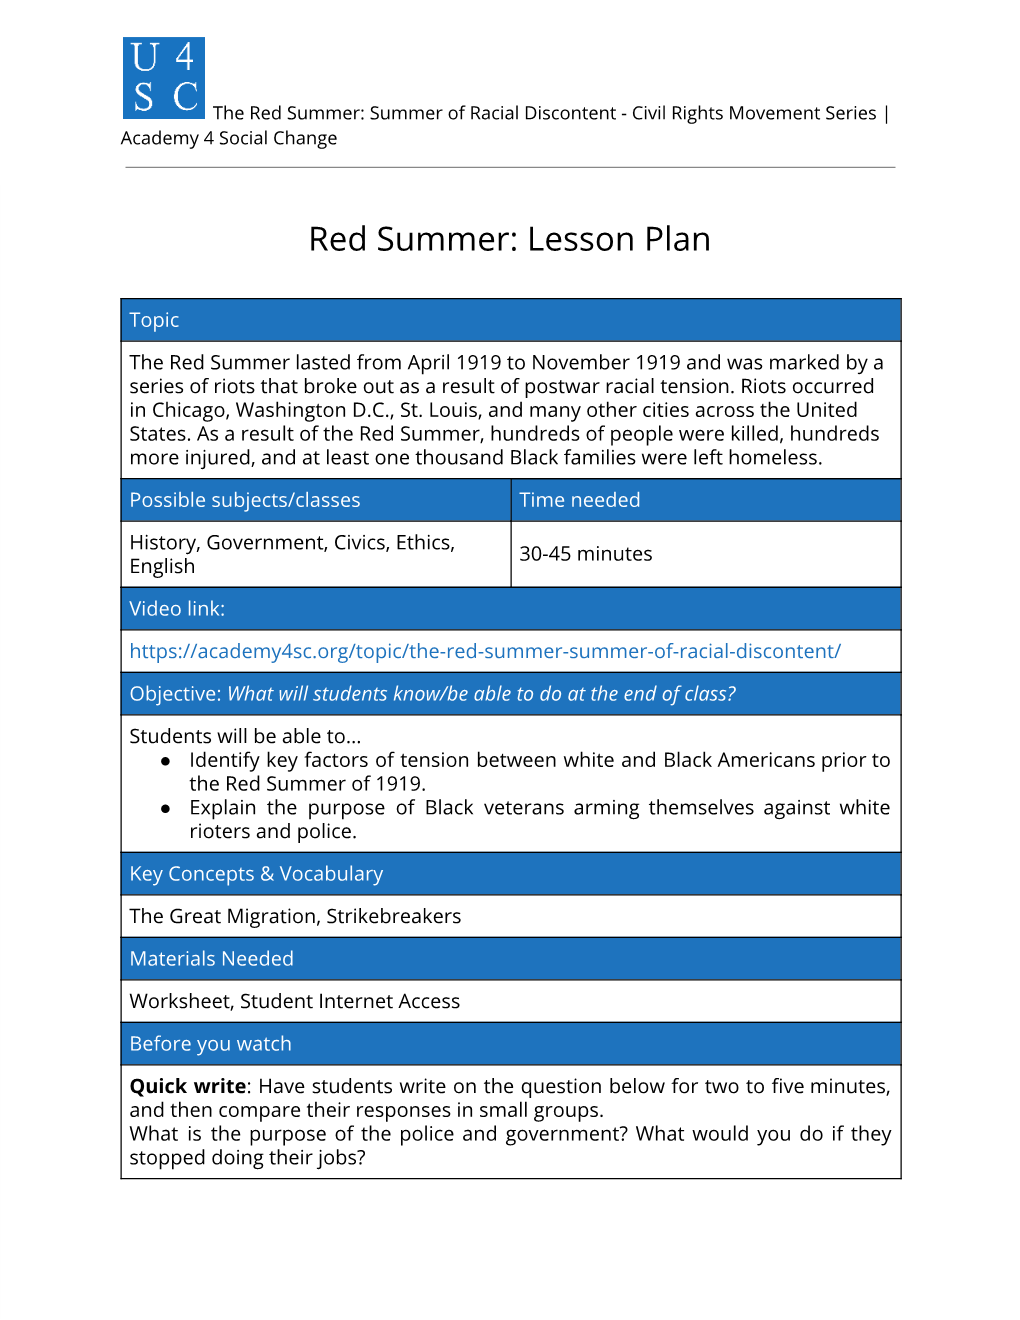 Red Summer: Lesson Plan